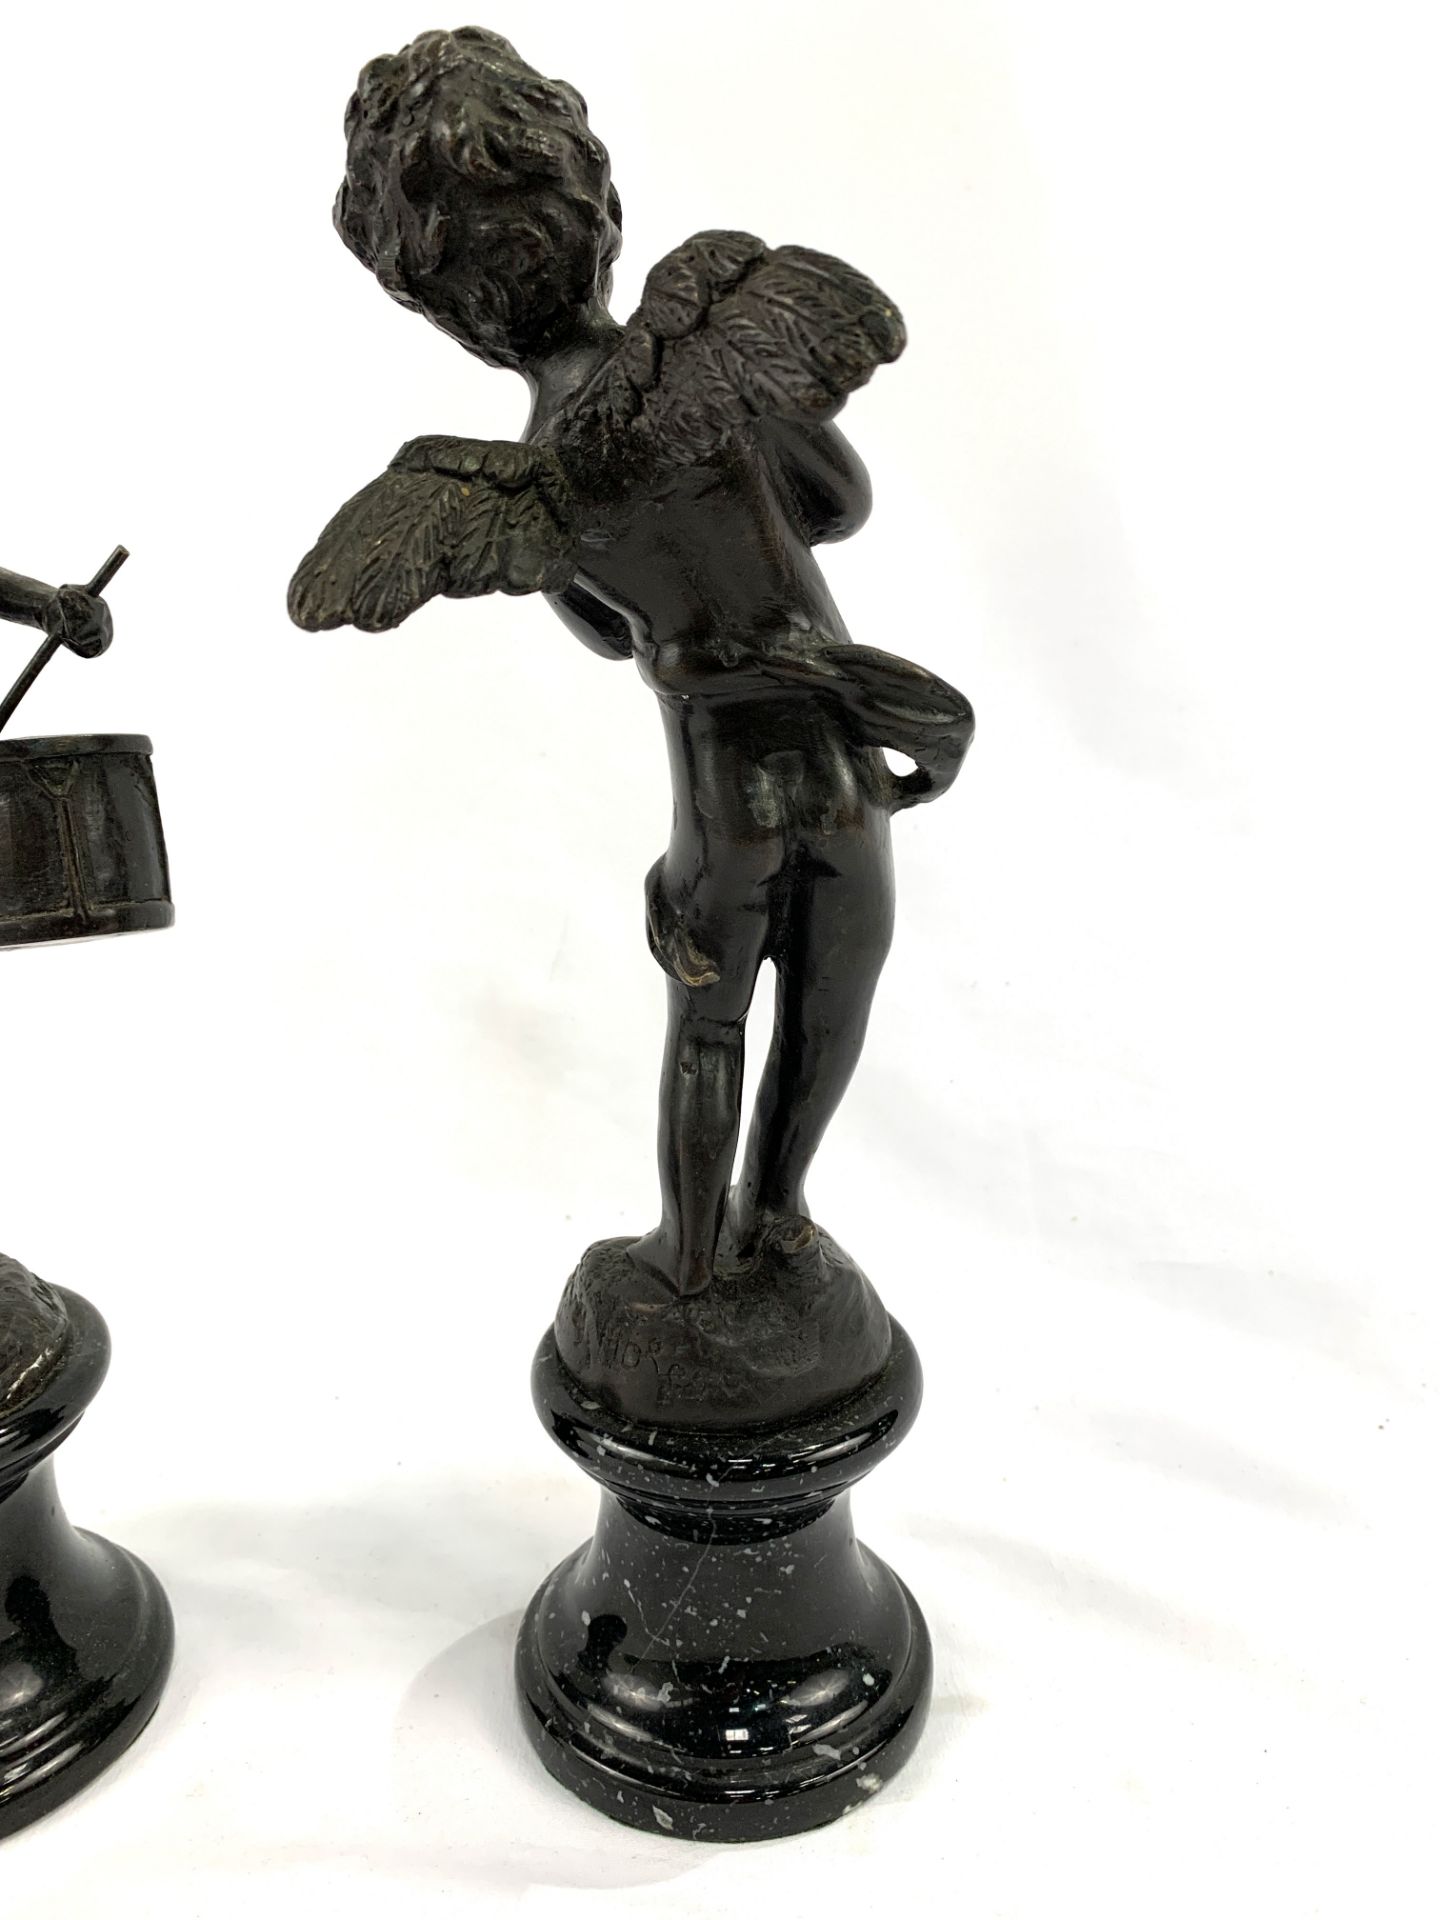 Pair of signed bronze figurines of putti on speckled marble bases, signed Auguste Moreau. - Image 5 of 5